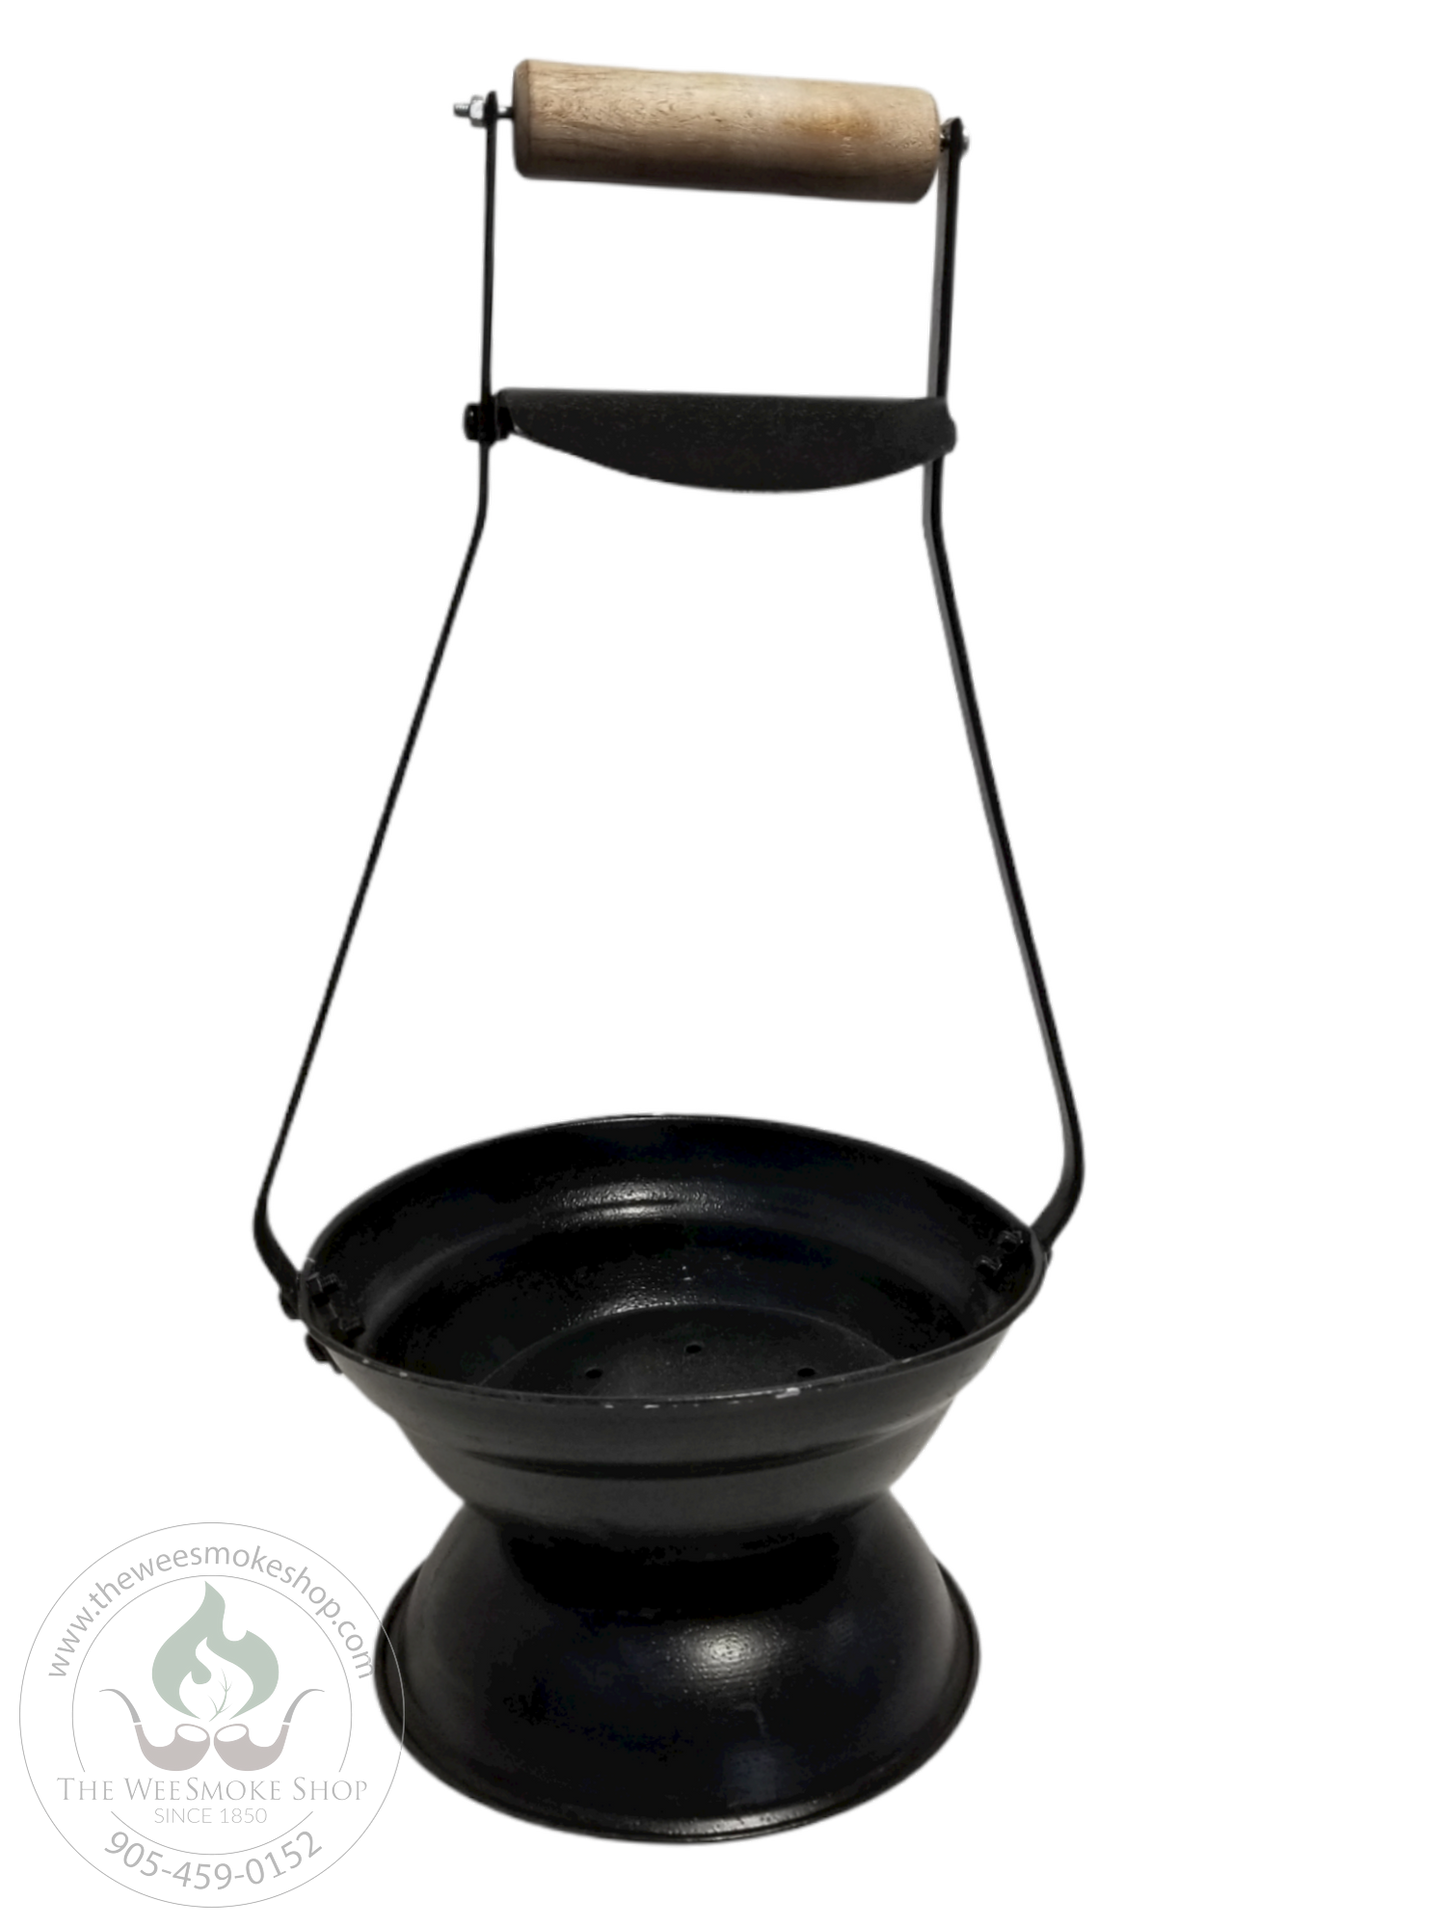 Black Egyptian Charcoal Holder-Hookah accessories-The Wee Smoke Shop